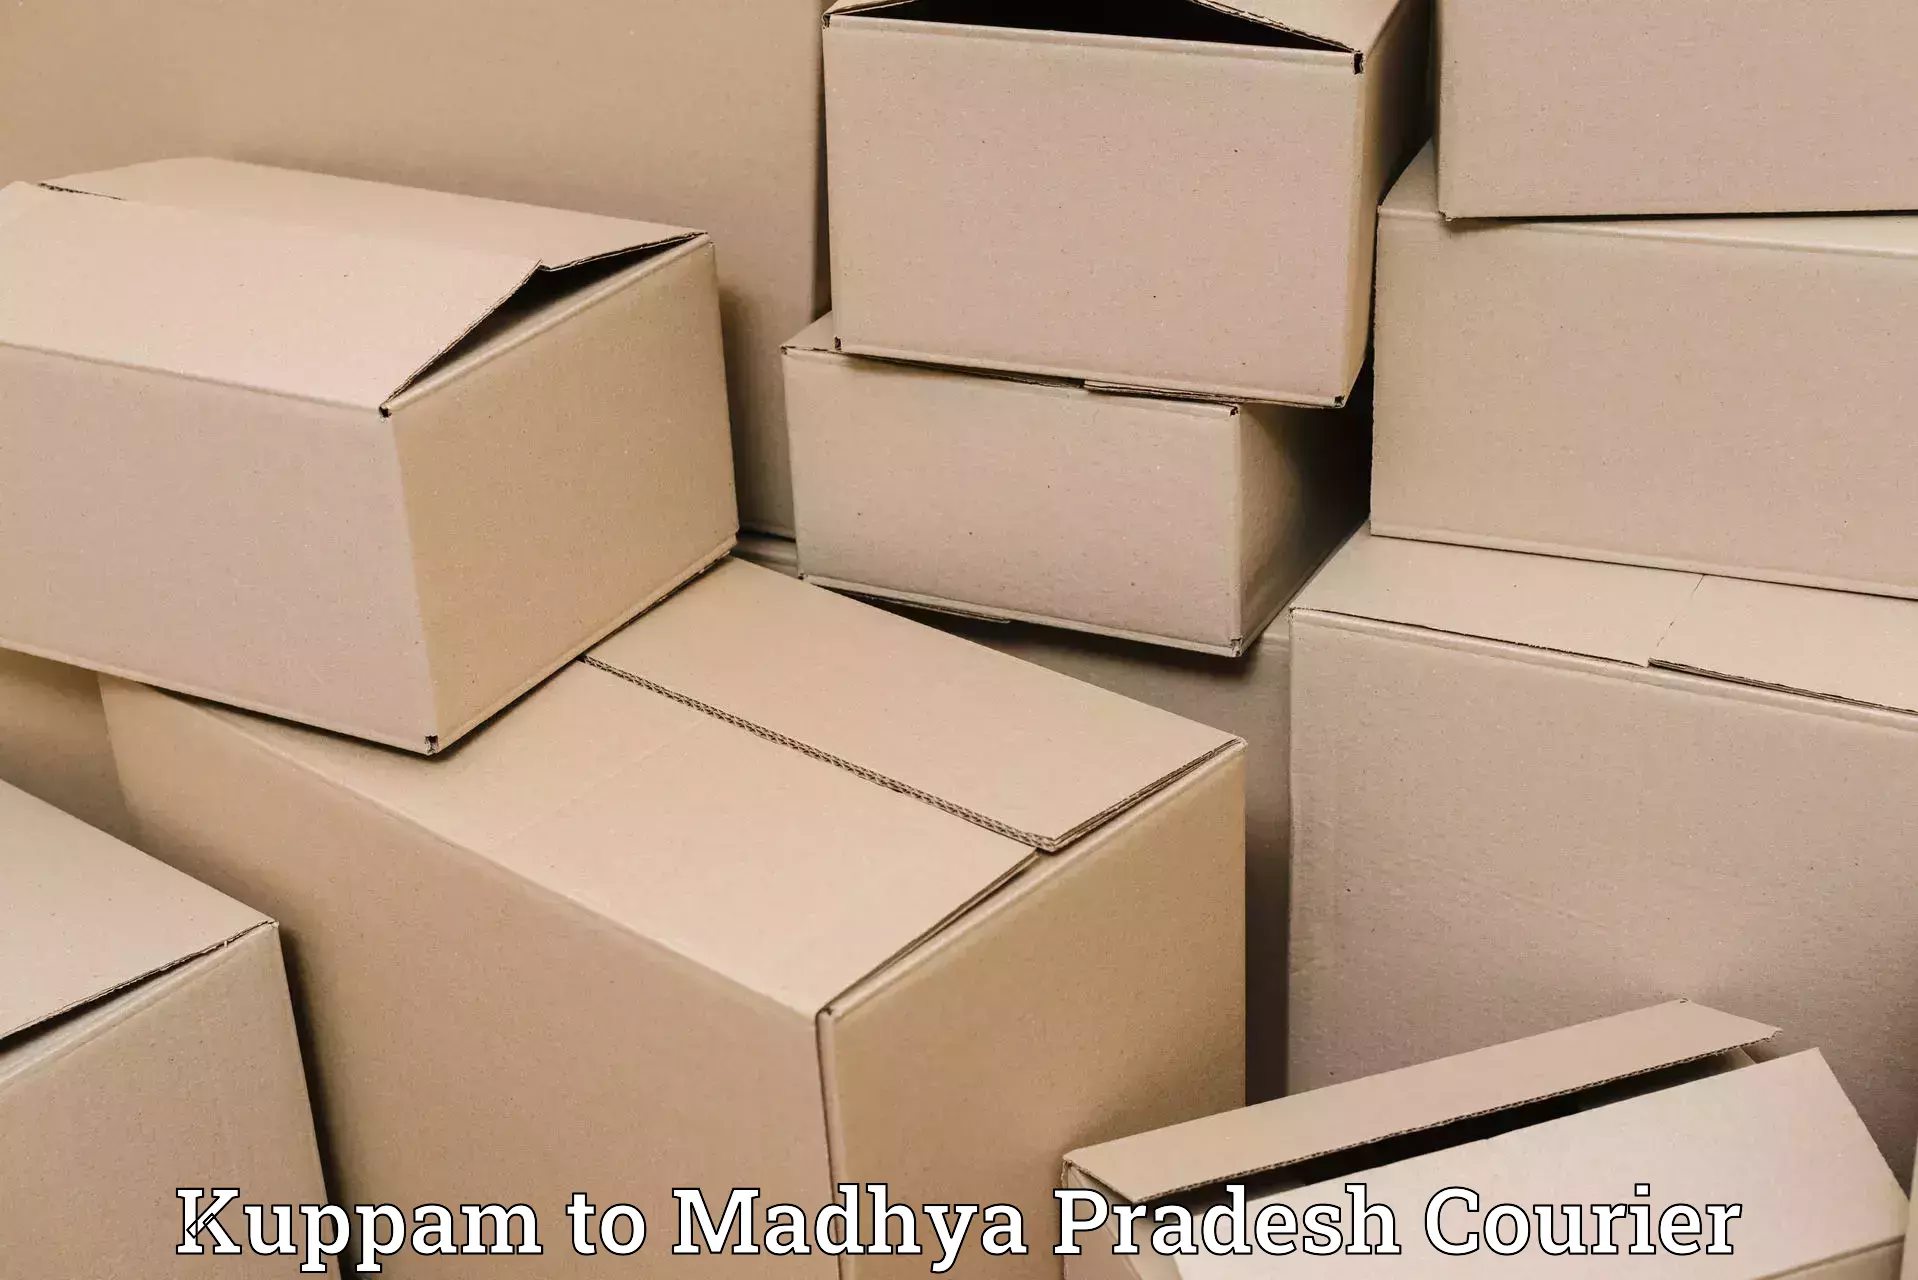 Seamless shipping experience Kuppam to Chapda